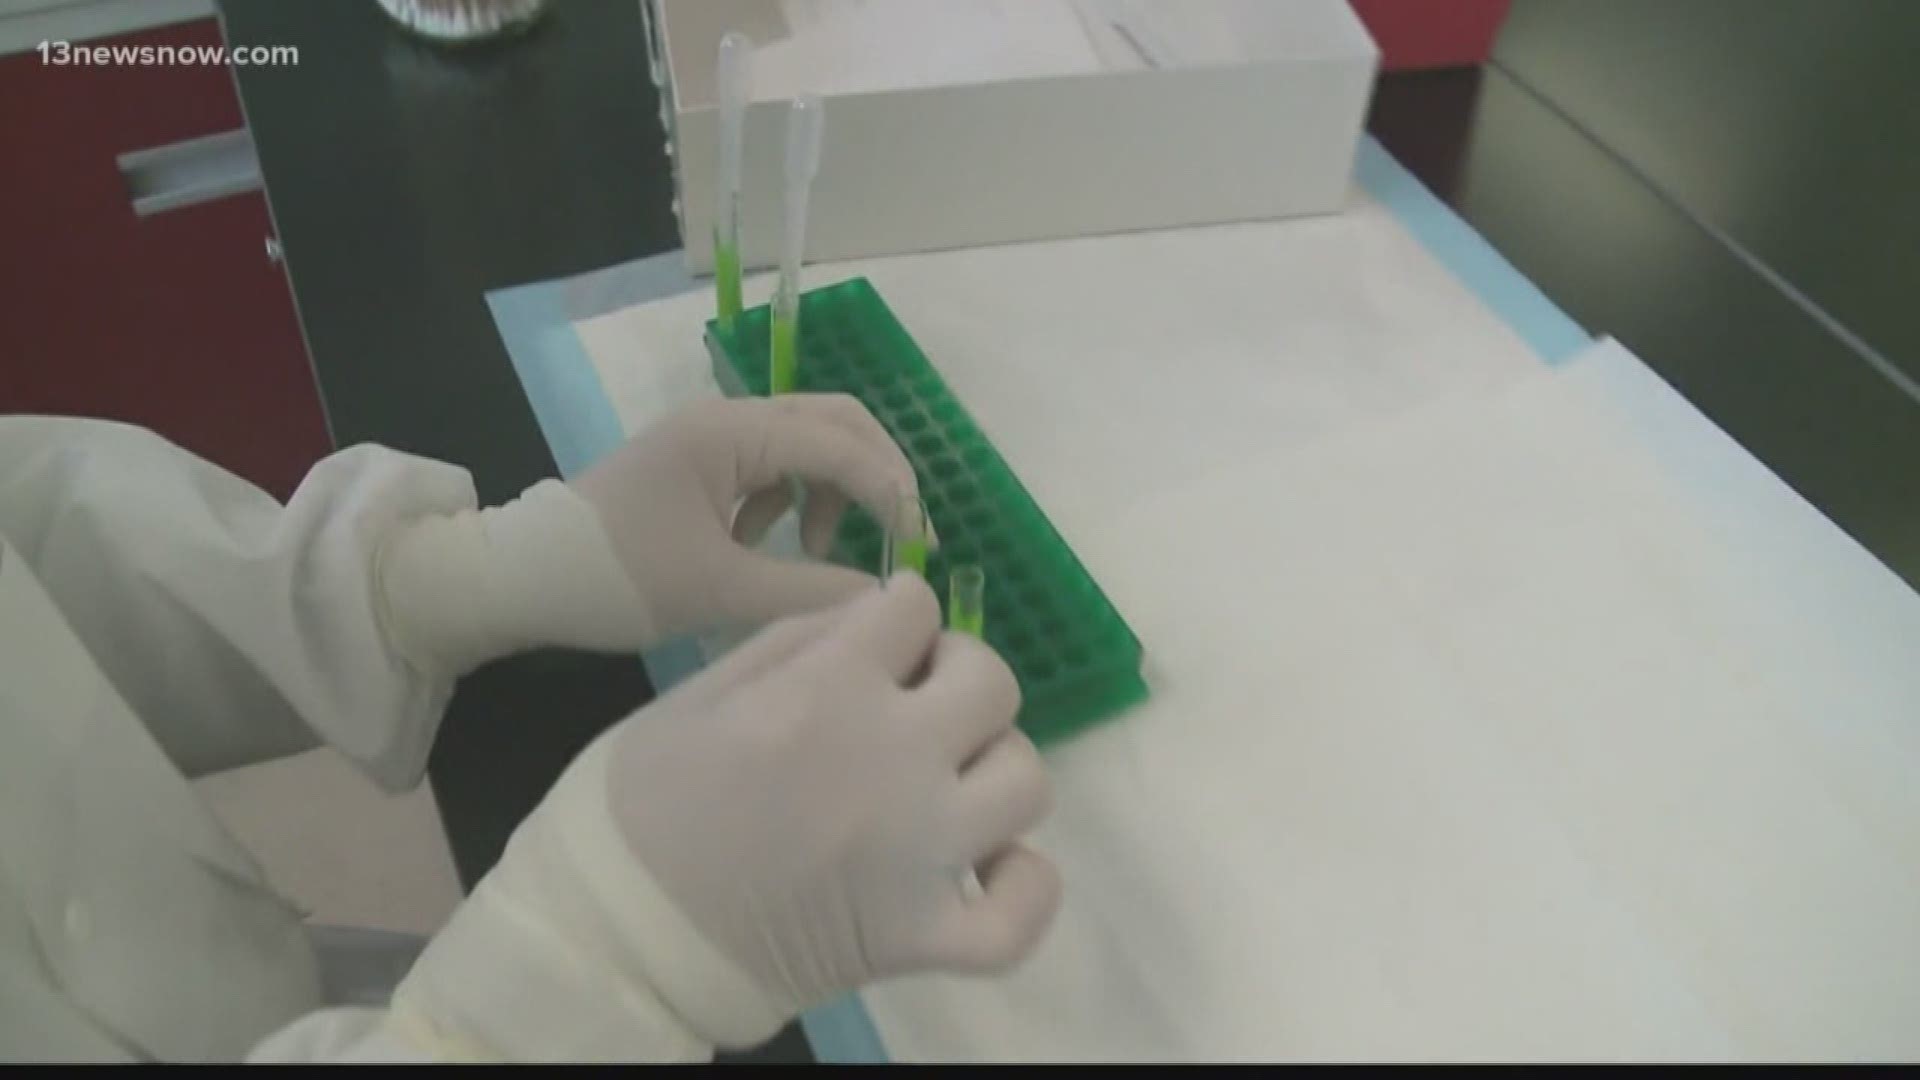 Some lawmakers want DNA samples collected from people who commit certain crimes, but the new offenses they want to add to the list are only misdemeanors.